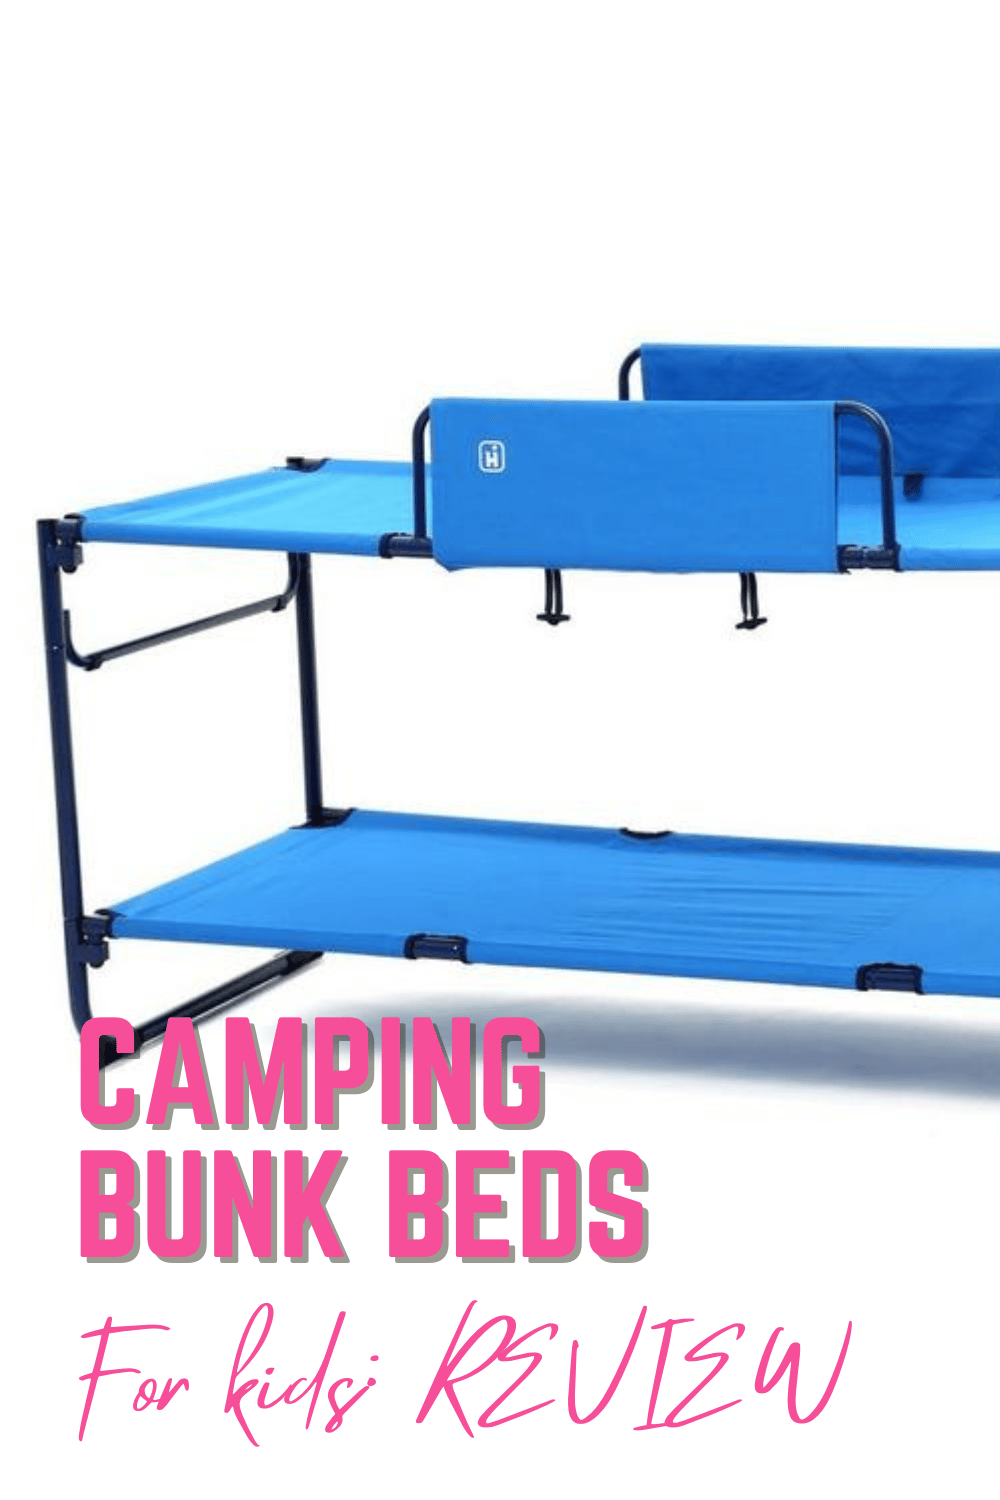 Camping bunk beds for kids REVIEW